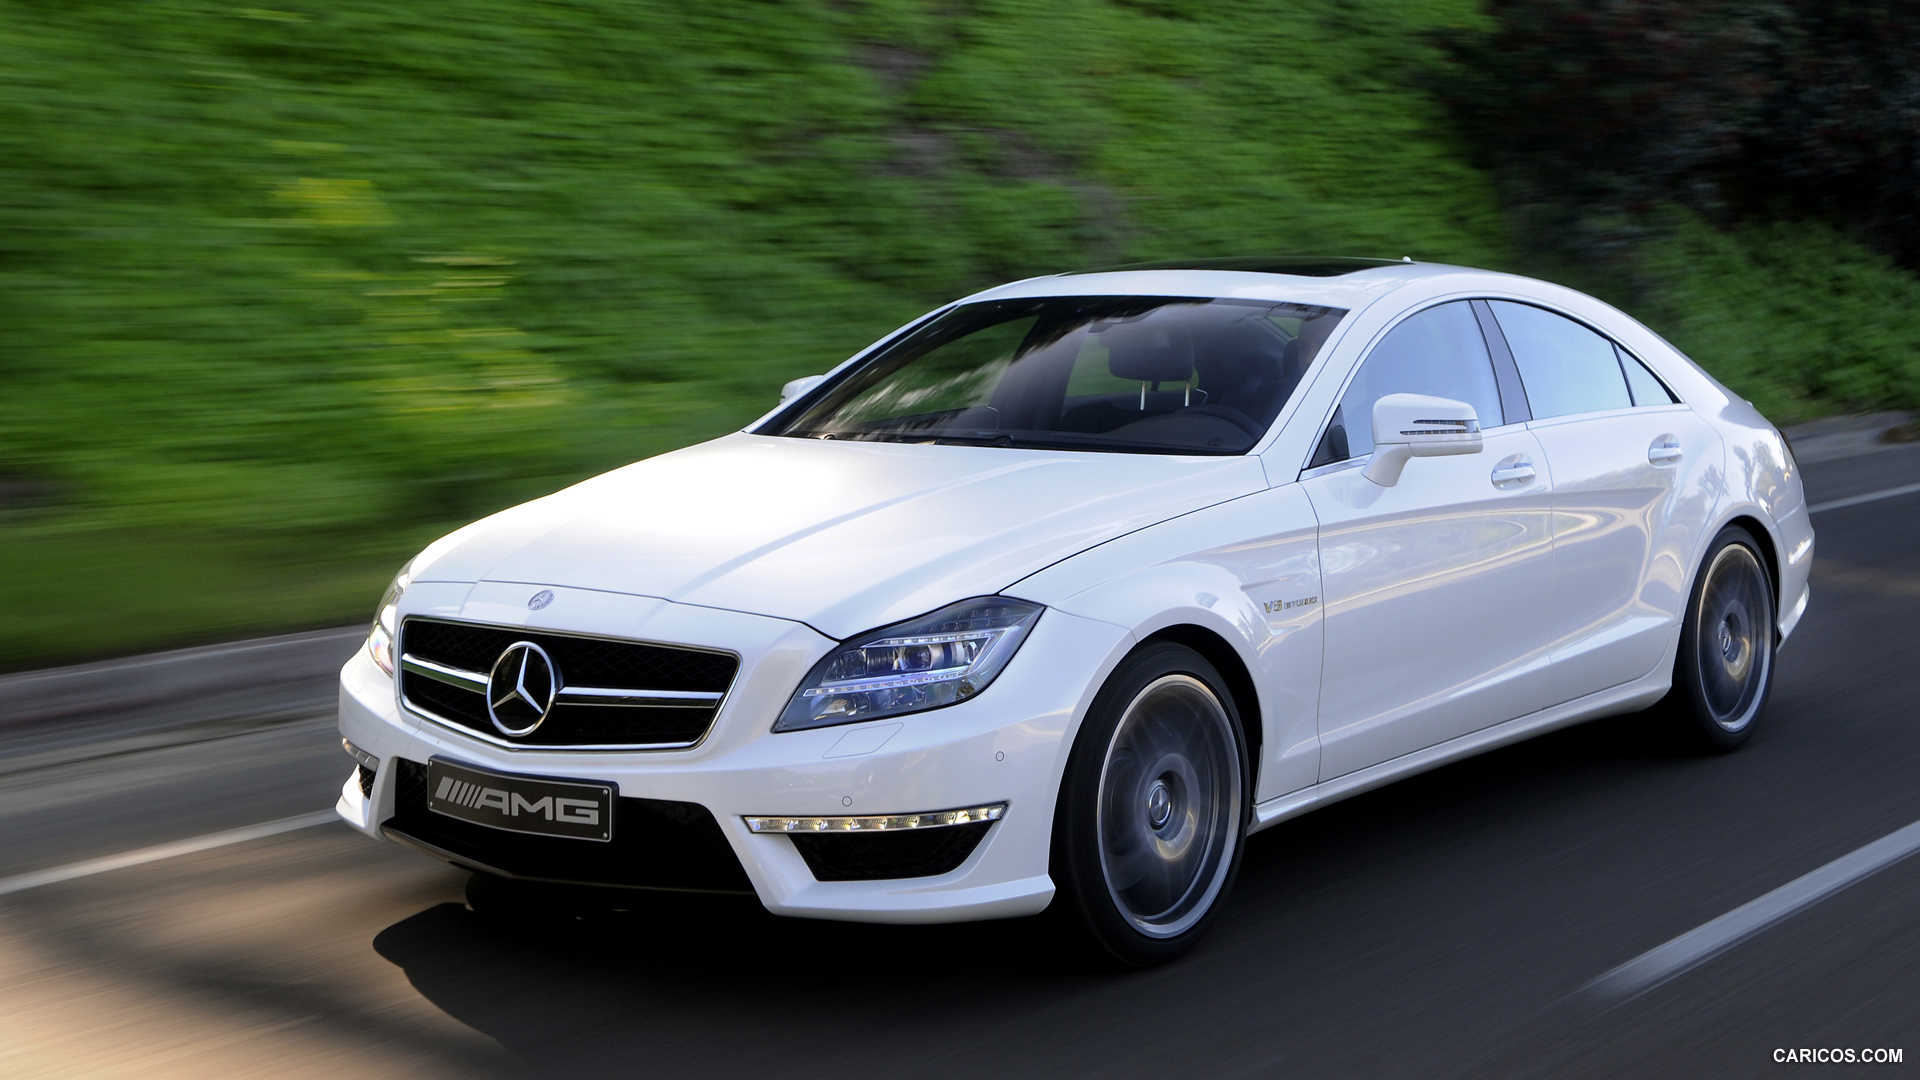 Mercedes-Benz CLS63 AMG (2012) US-Version - Diamond White - Front , #1 of 100